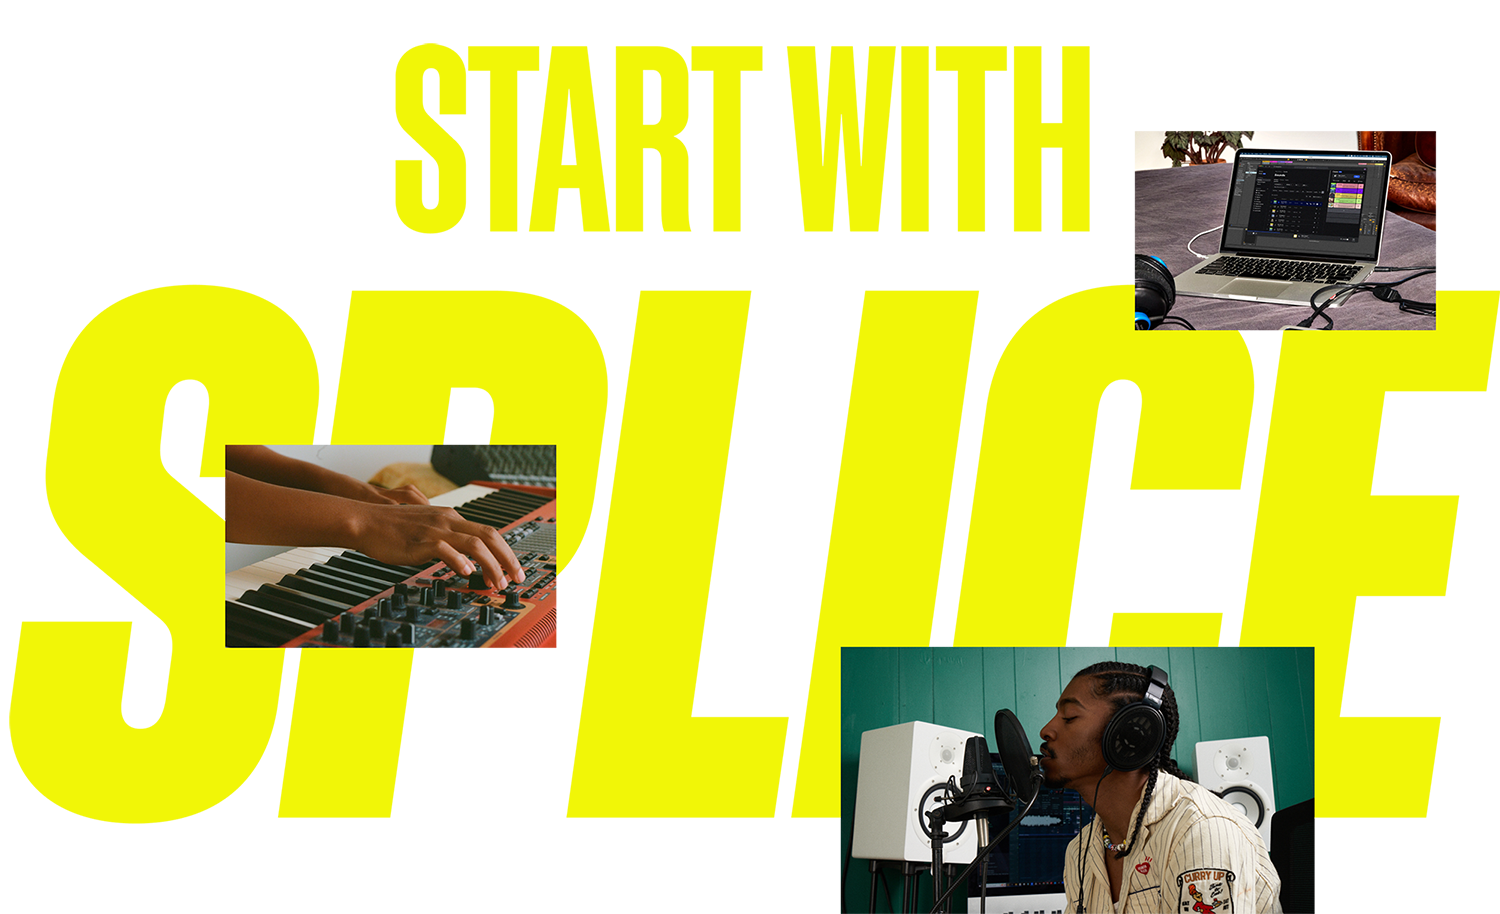 "Start with Splice" on a collage of music production images.